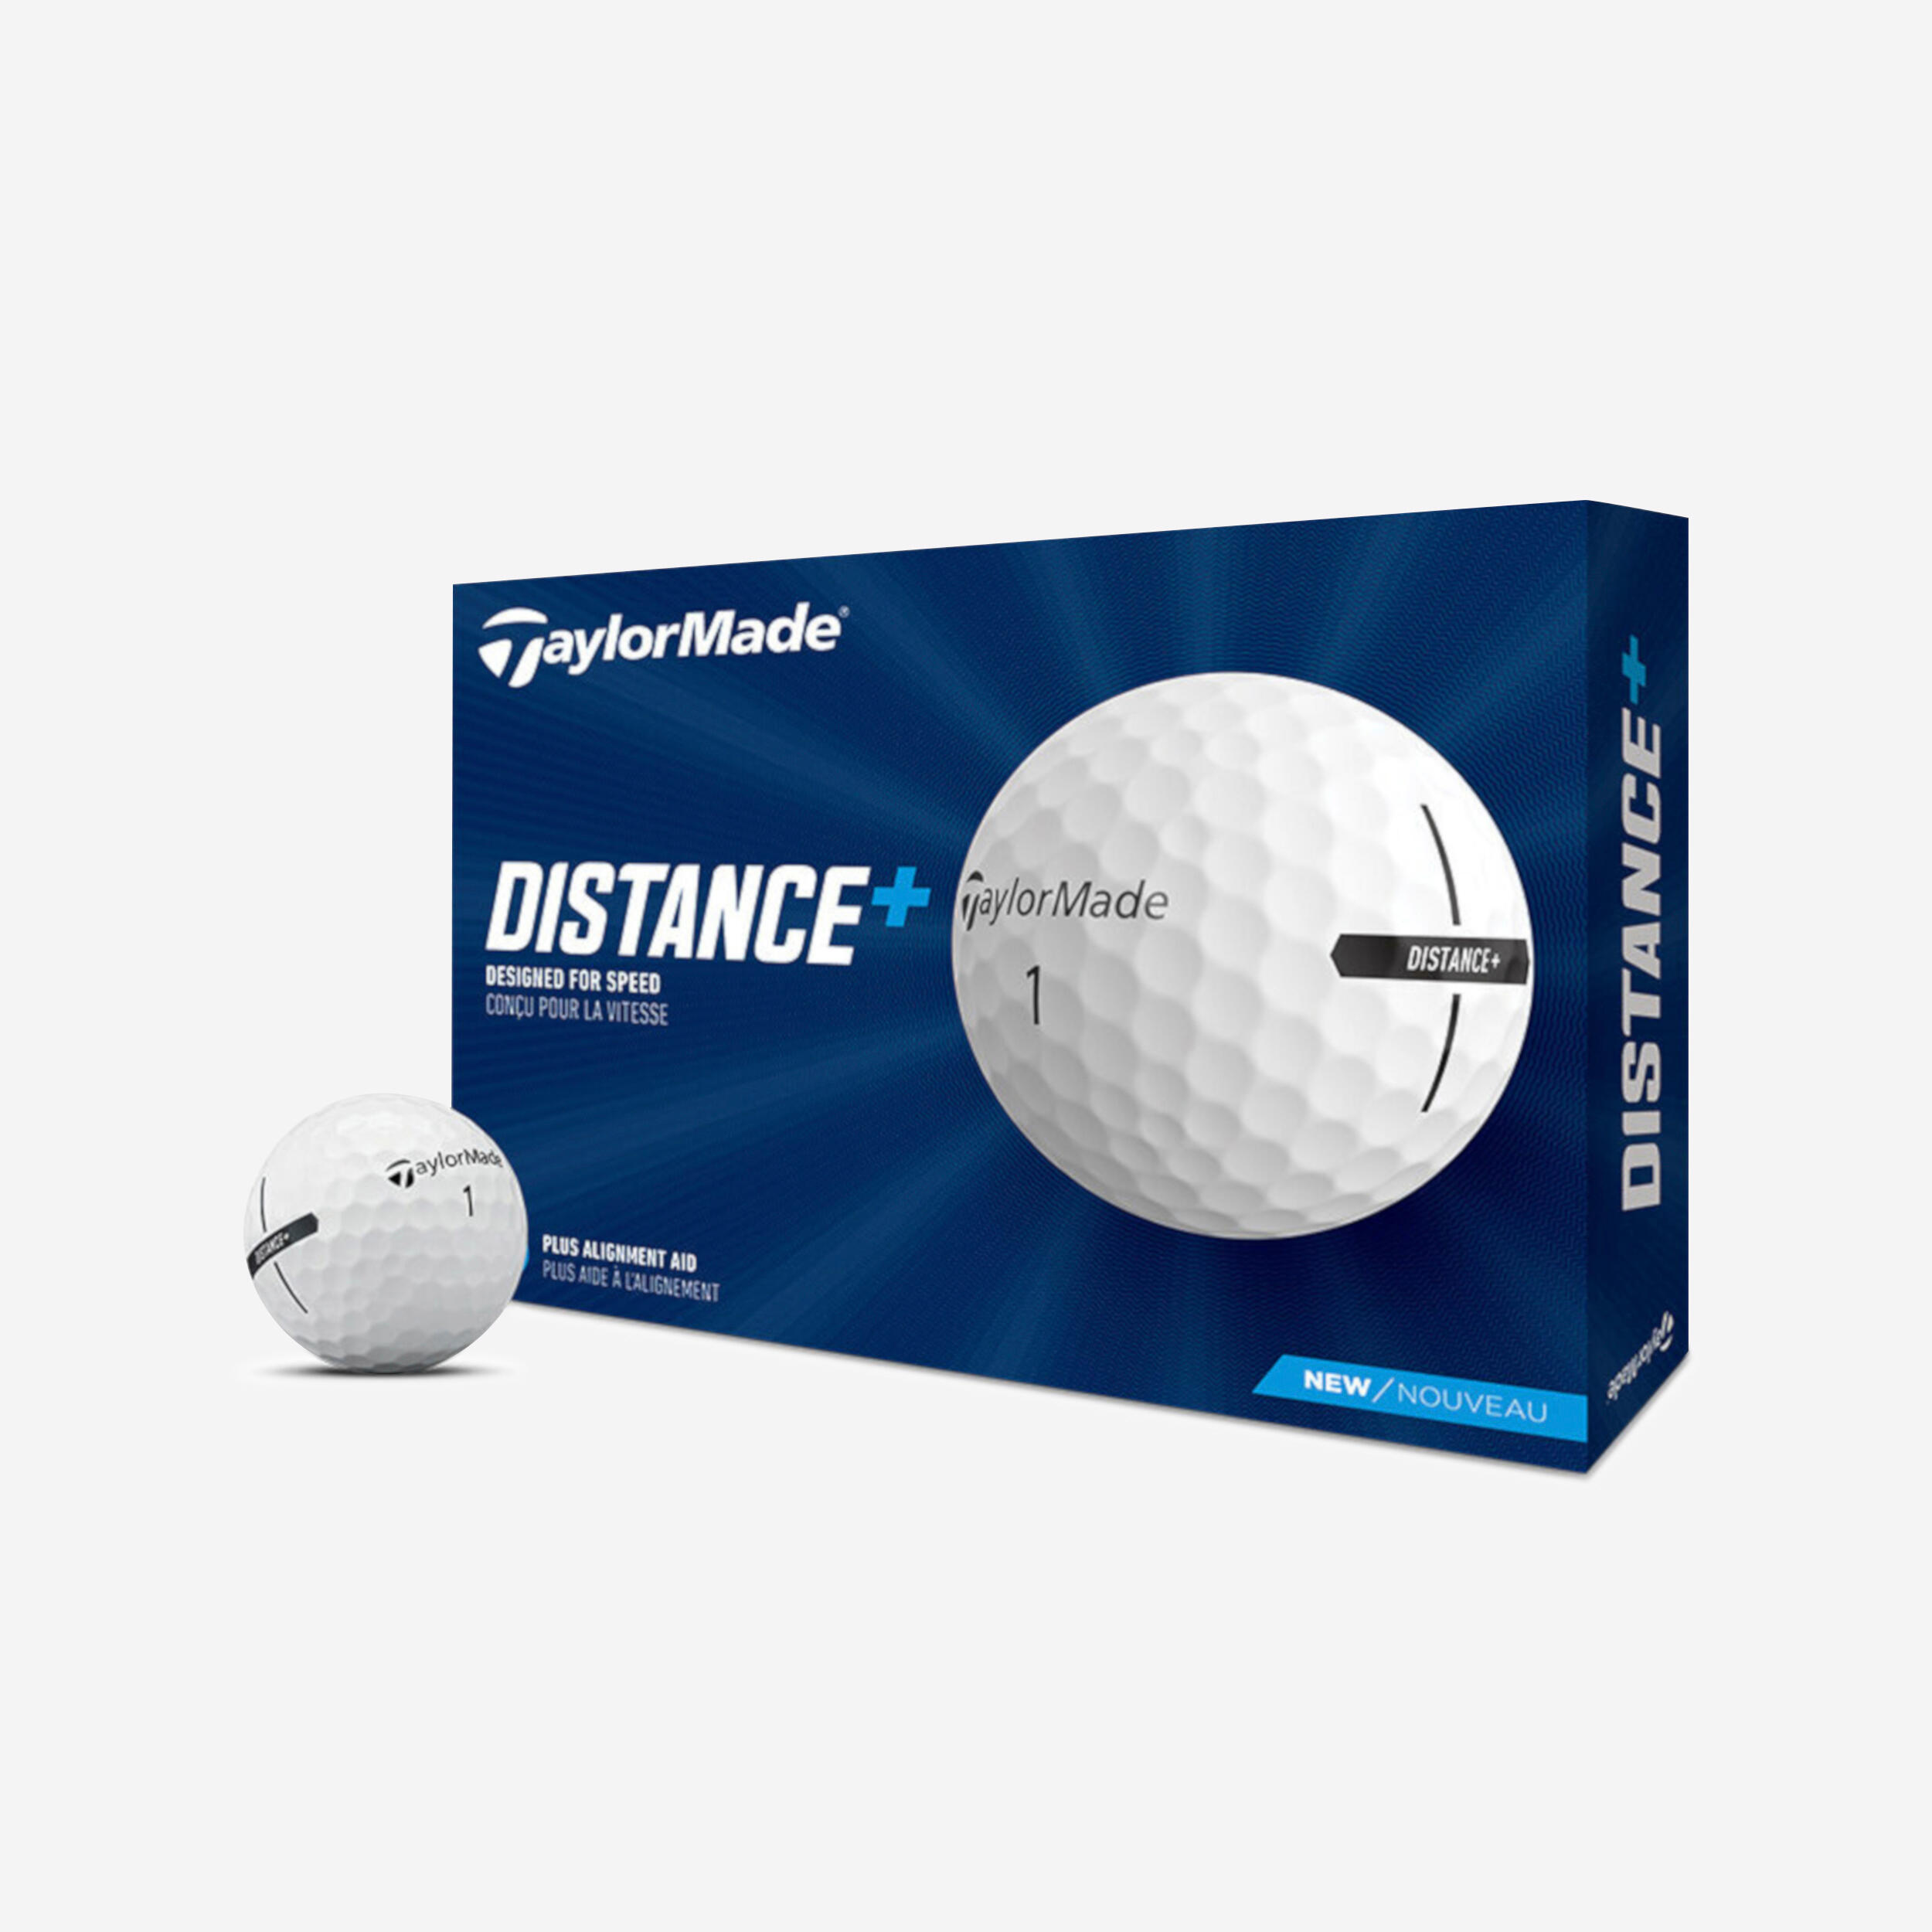 TAYLORMADE Golf balls x12 - TAYLORMADE Distance+ white